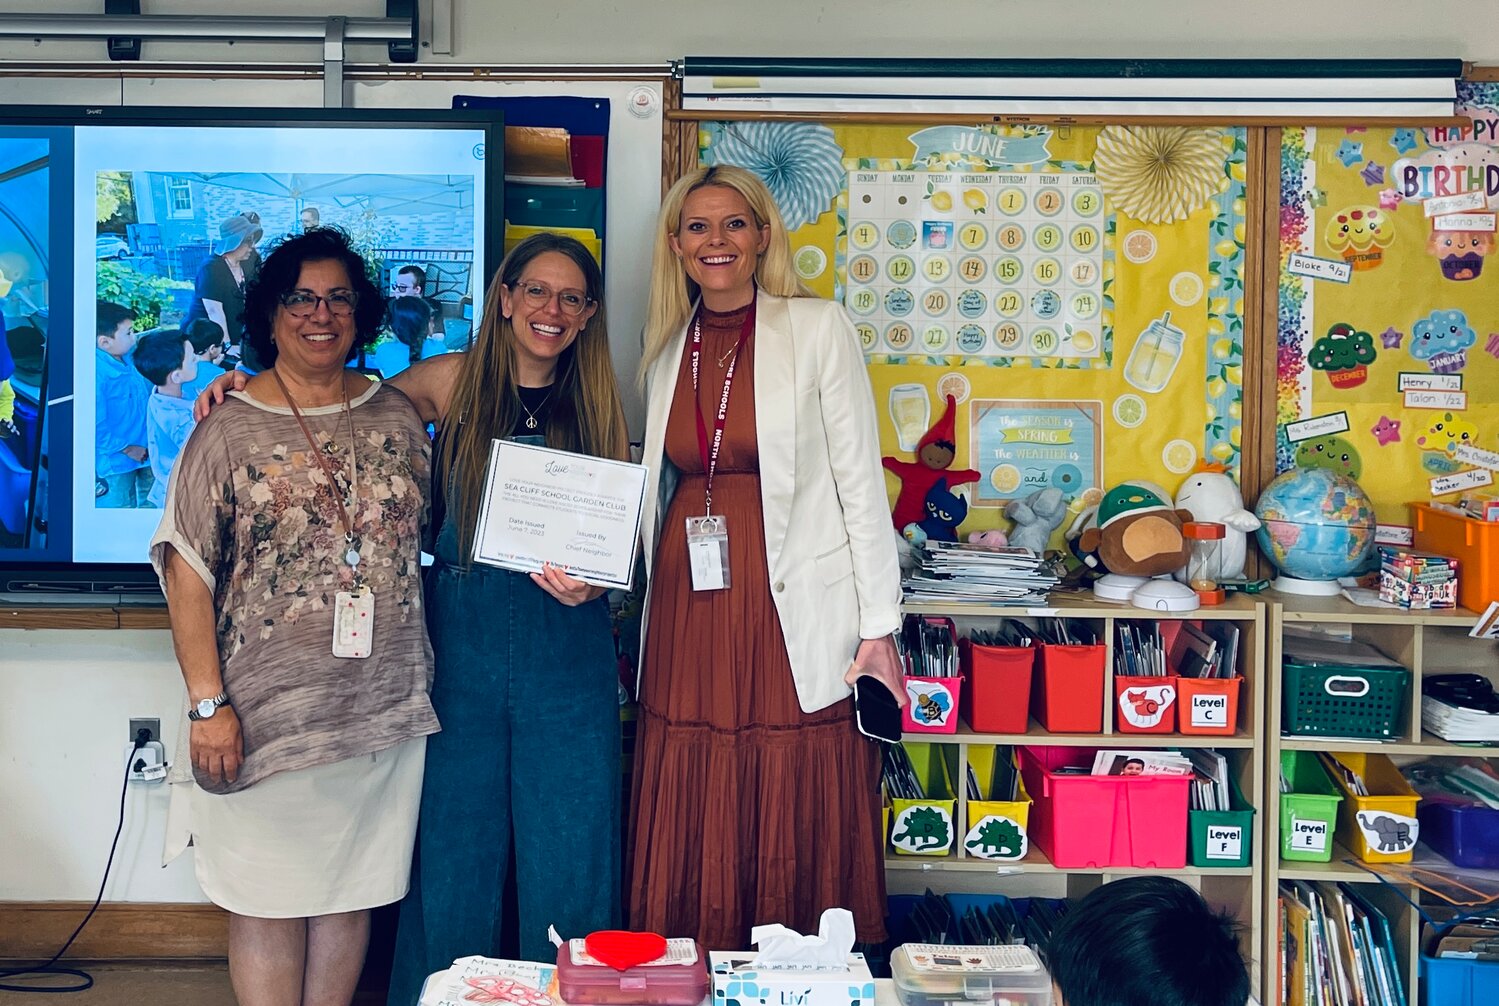 Jaime Teich, Love Your Neighbor Project’s chief neighbor, center, presented a scholarship to the Sea Cliff School’s Garden Club, which was accepted by the club’s advisor Mojdeh Hassani, left, and the Sea Cliff School principal Megan McCormick.